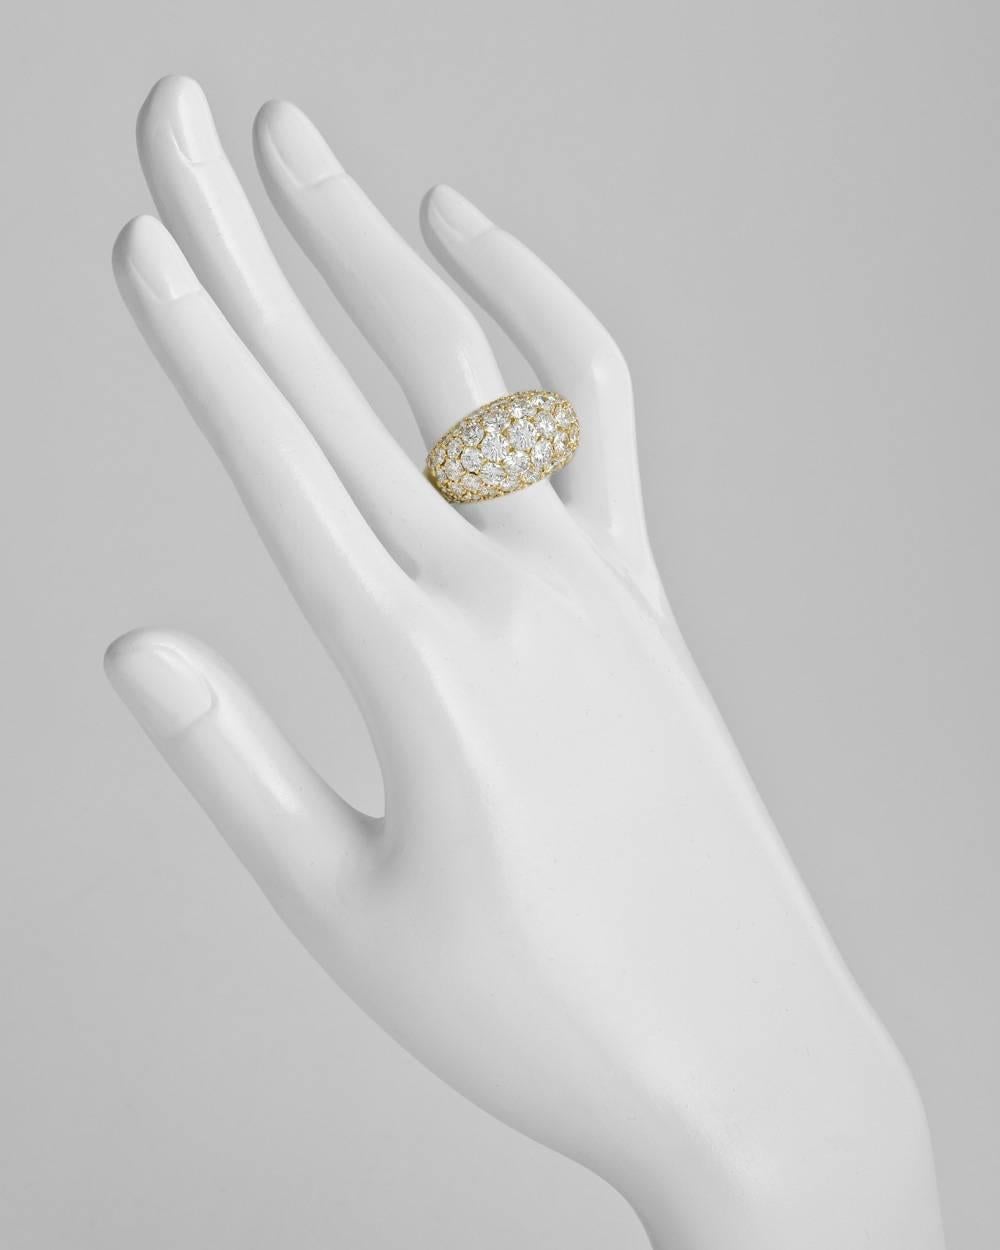 Pavé diamond dome ring, set with 75 round diamonds graduating in size and altogether weighing approximately 7.00 total carats, the ring measuring 14mm across at the widest point and tapering to the base, mounted in 18k yellow gold, numbered 143404,